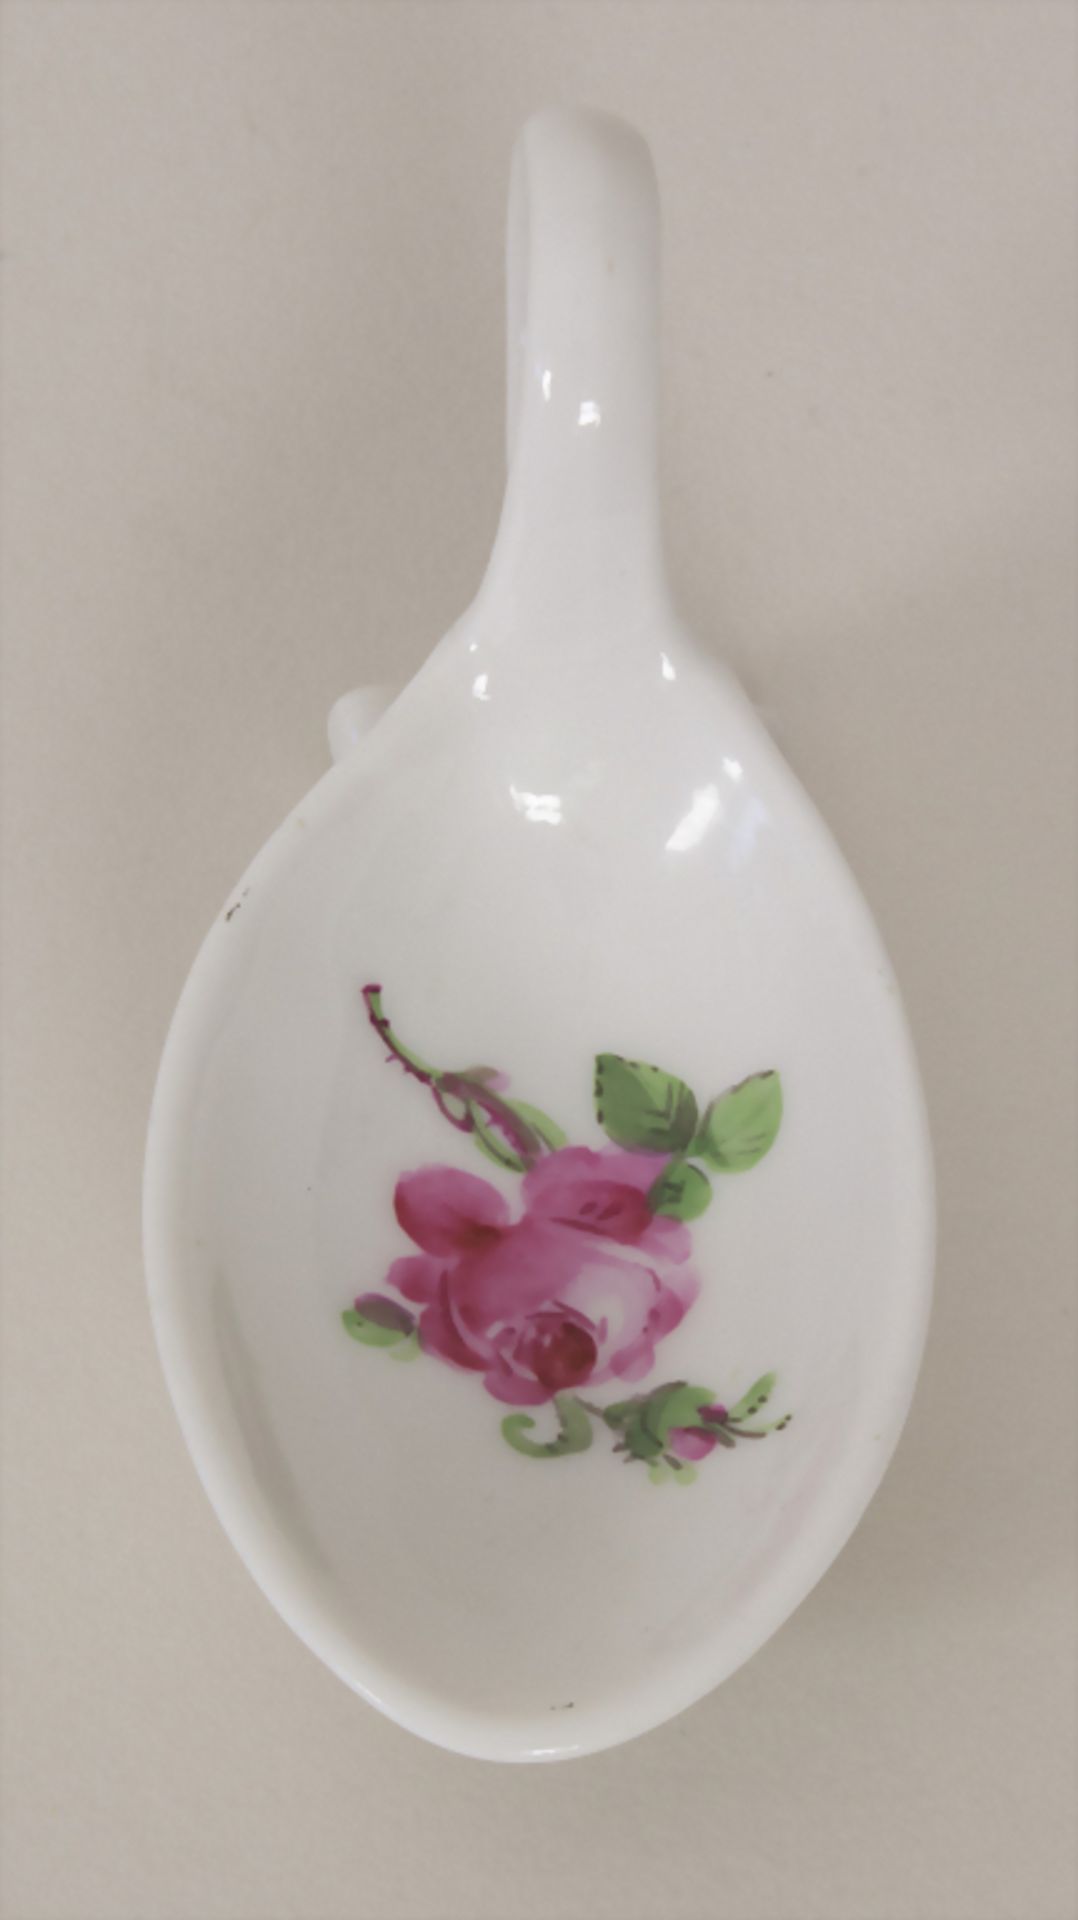 Seltener Löffel 'Rote Rose' / A rare spoon with rose pattern, Meissen, Mitte 19. Jh. - Image 2 of 5